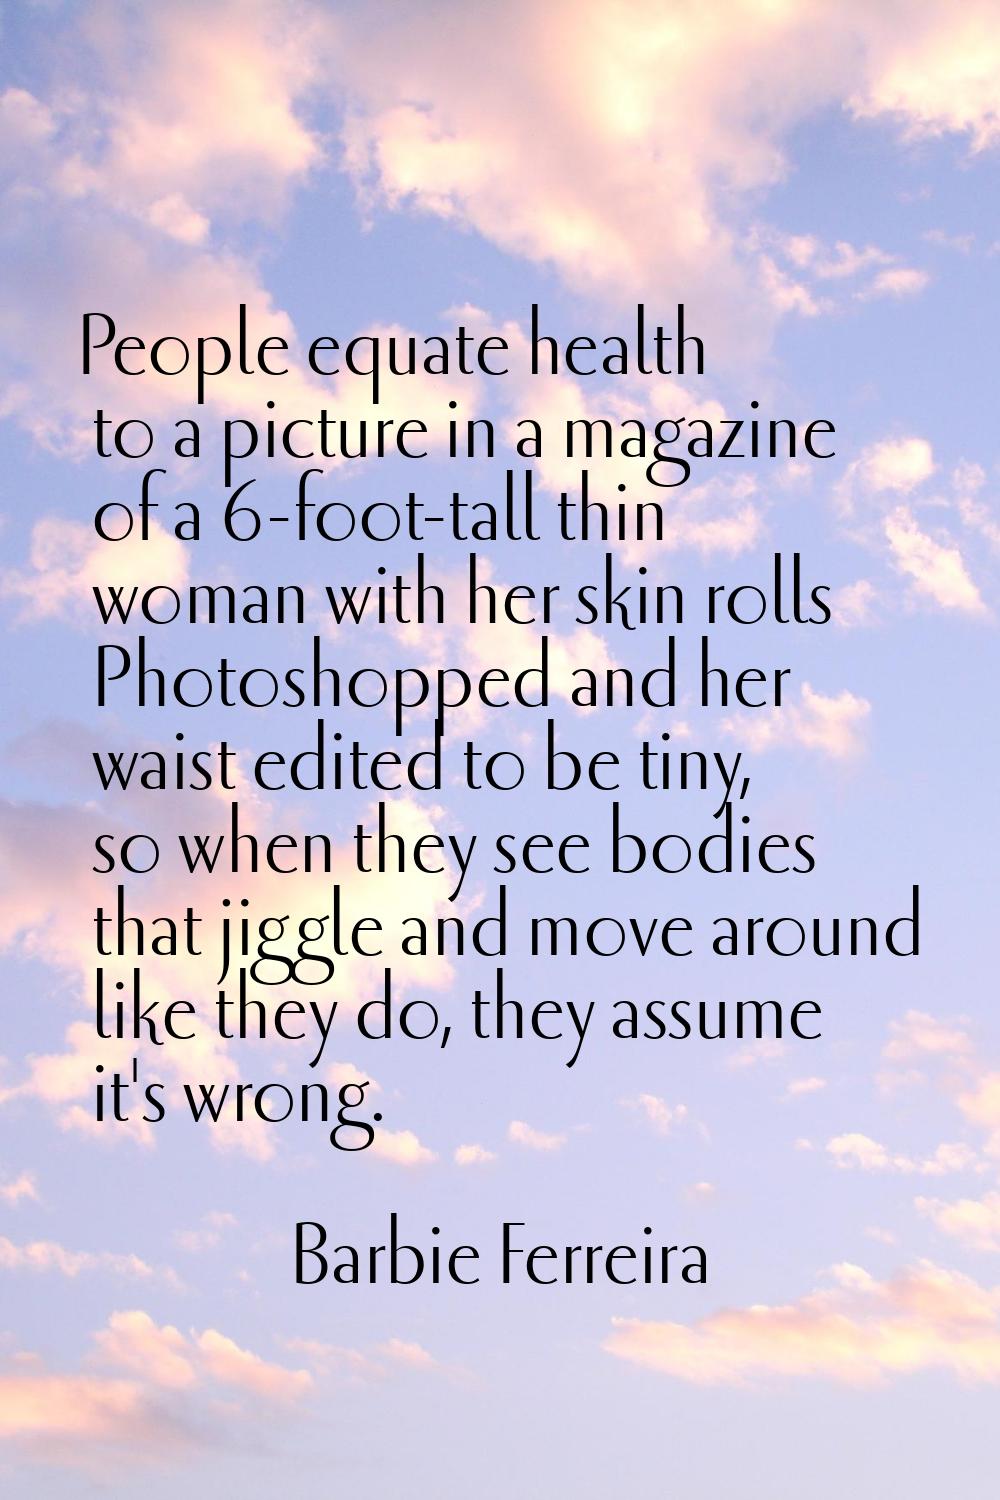 People equate health to a picture in a magazine of a 6-foot-tall thin woman with her skin rolls Pho